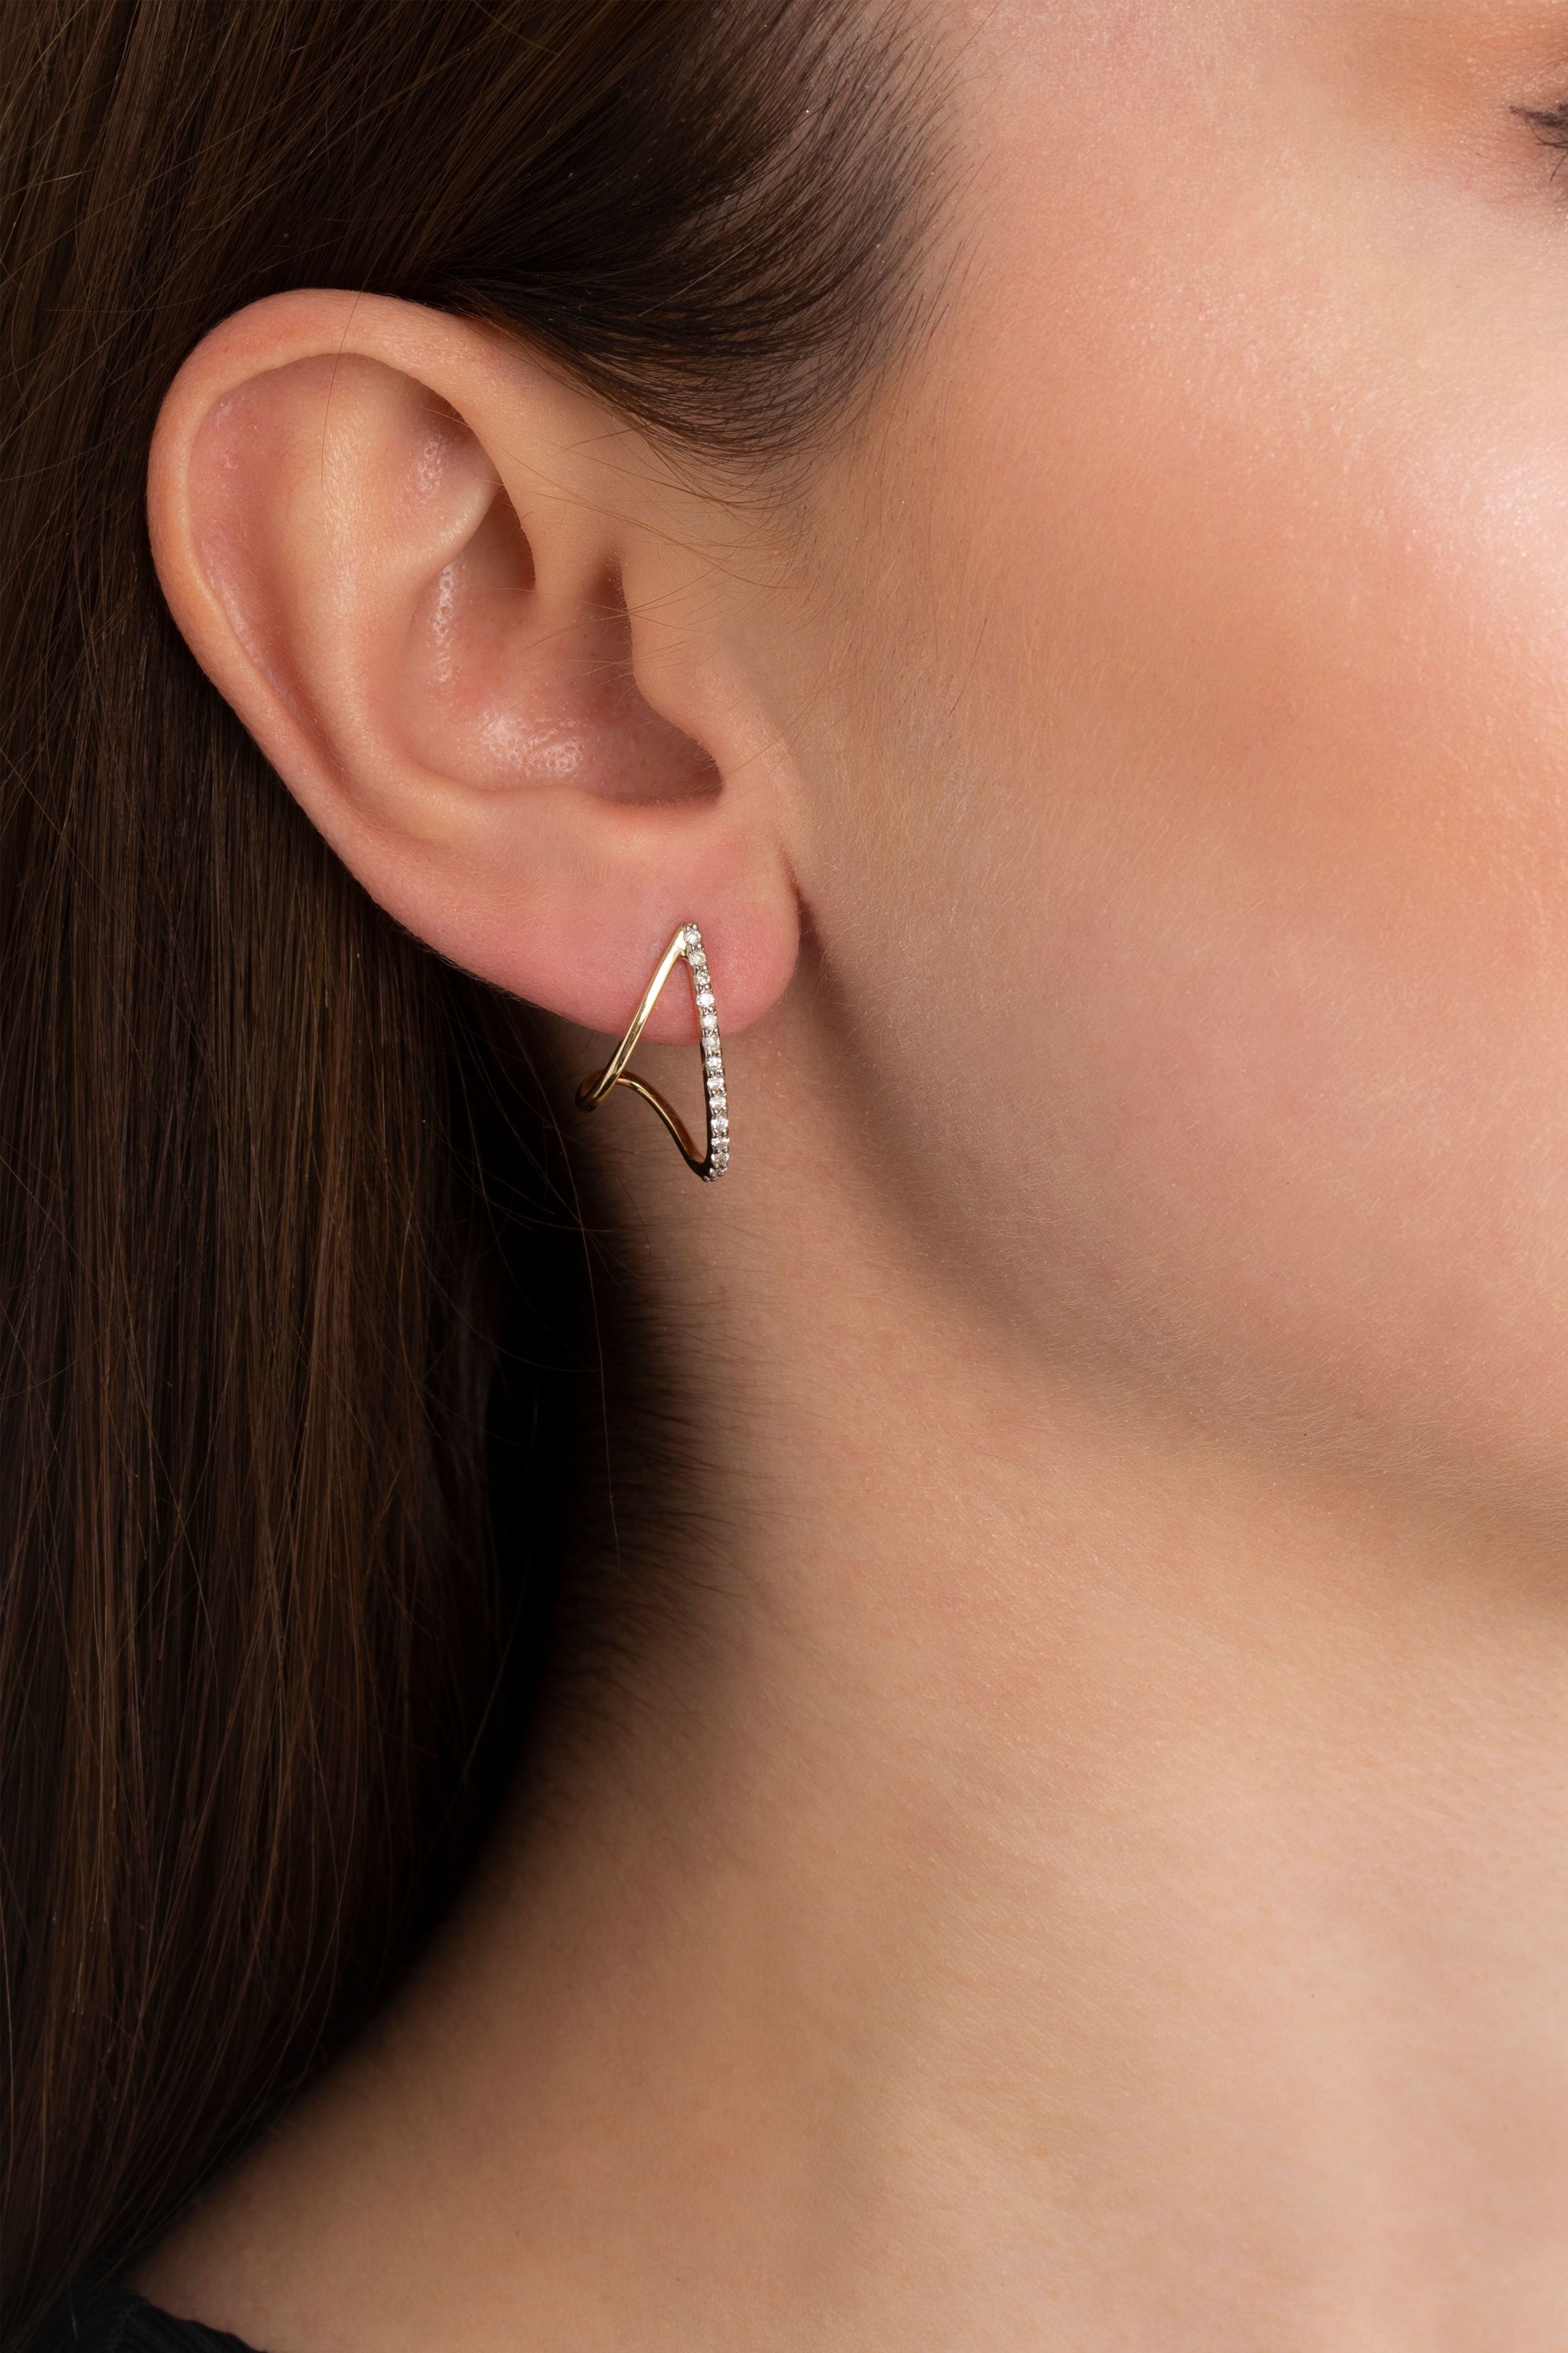 Double Hoop Diamond Earring in Yellow Gold - Her Story Shop